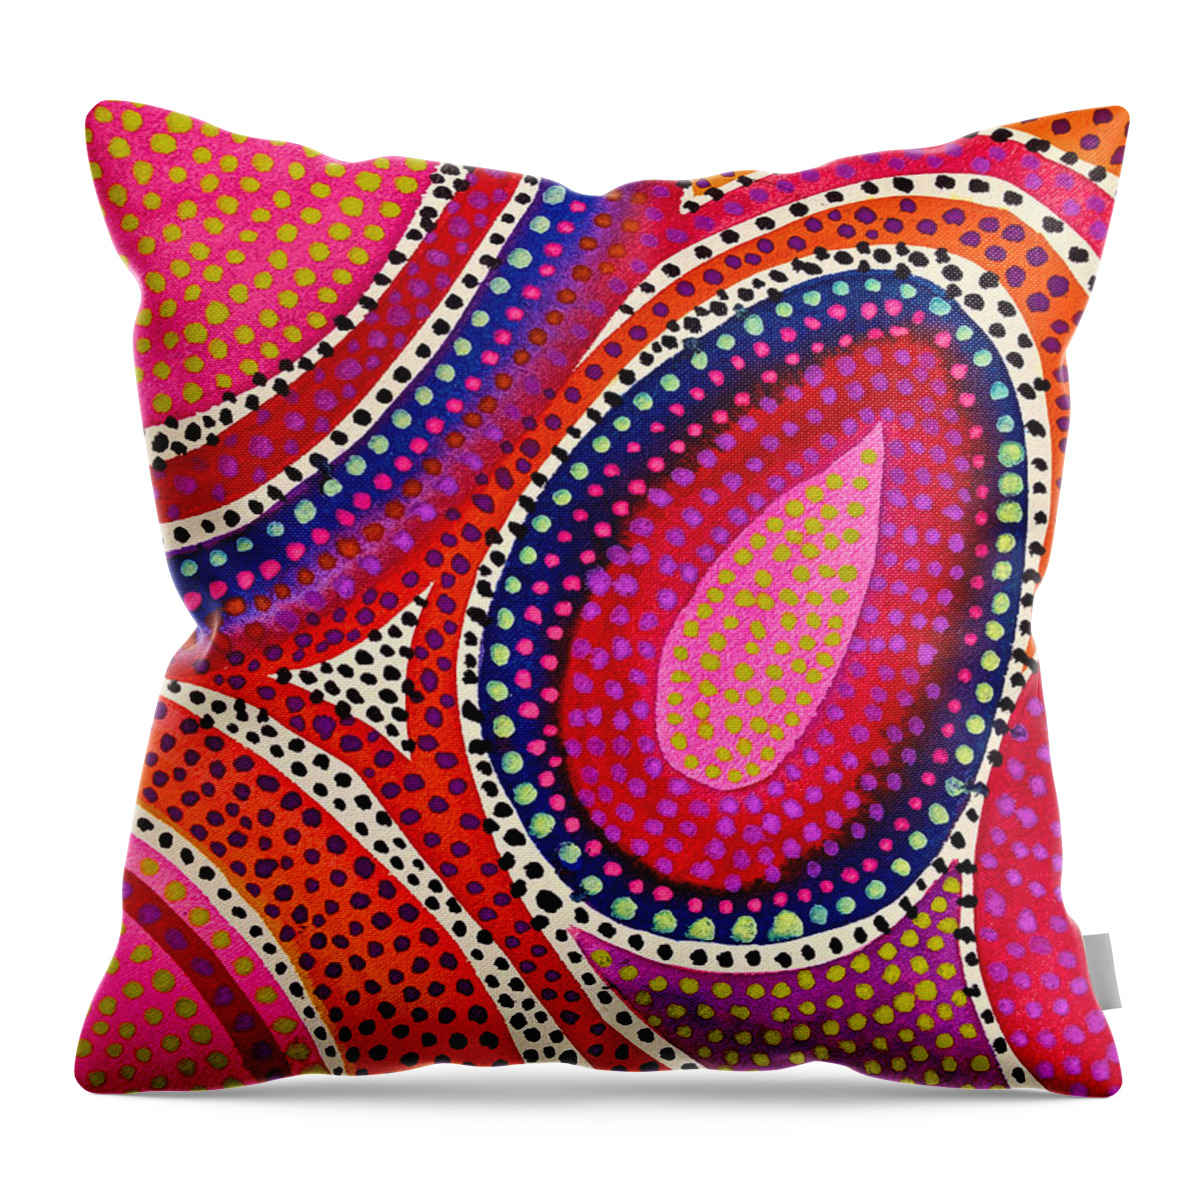  Throw Pillow featuring the painting This Brings Me so Much Joy by Polly Castor